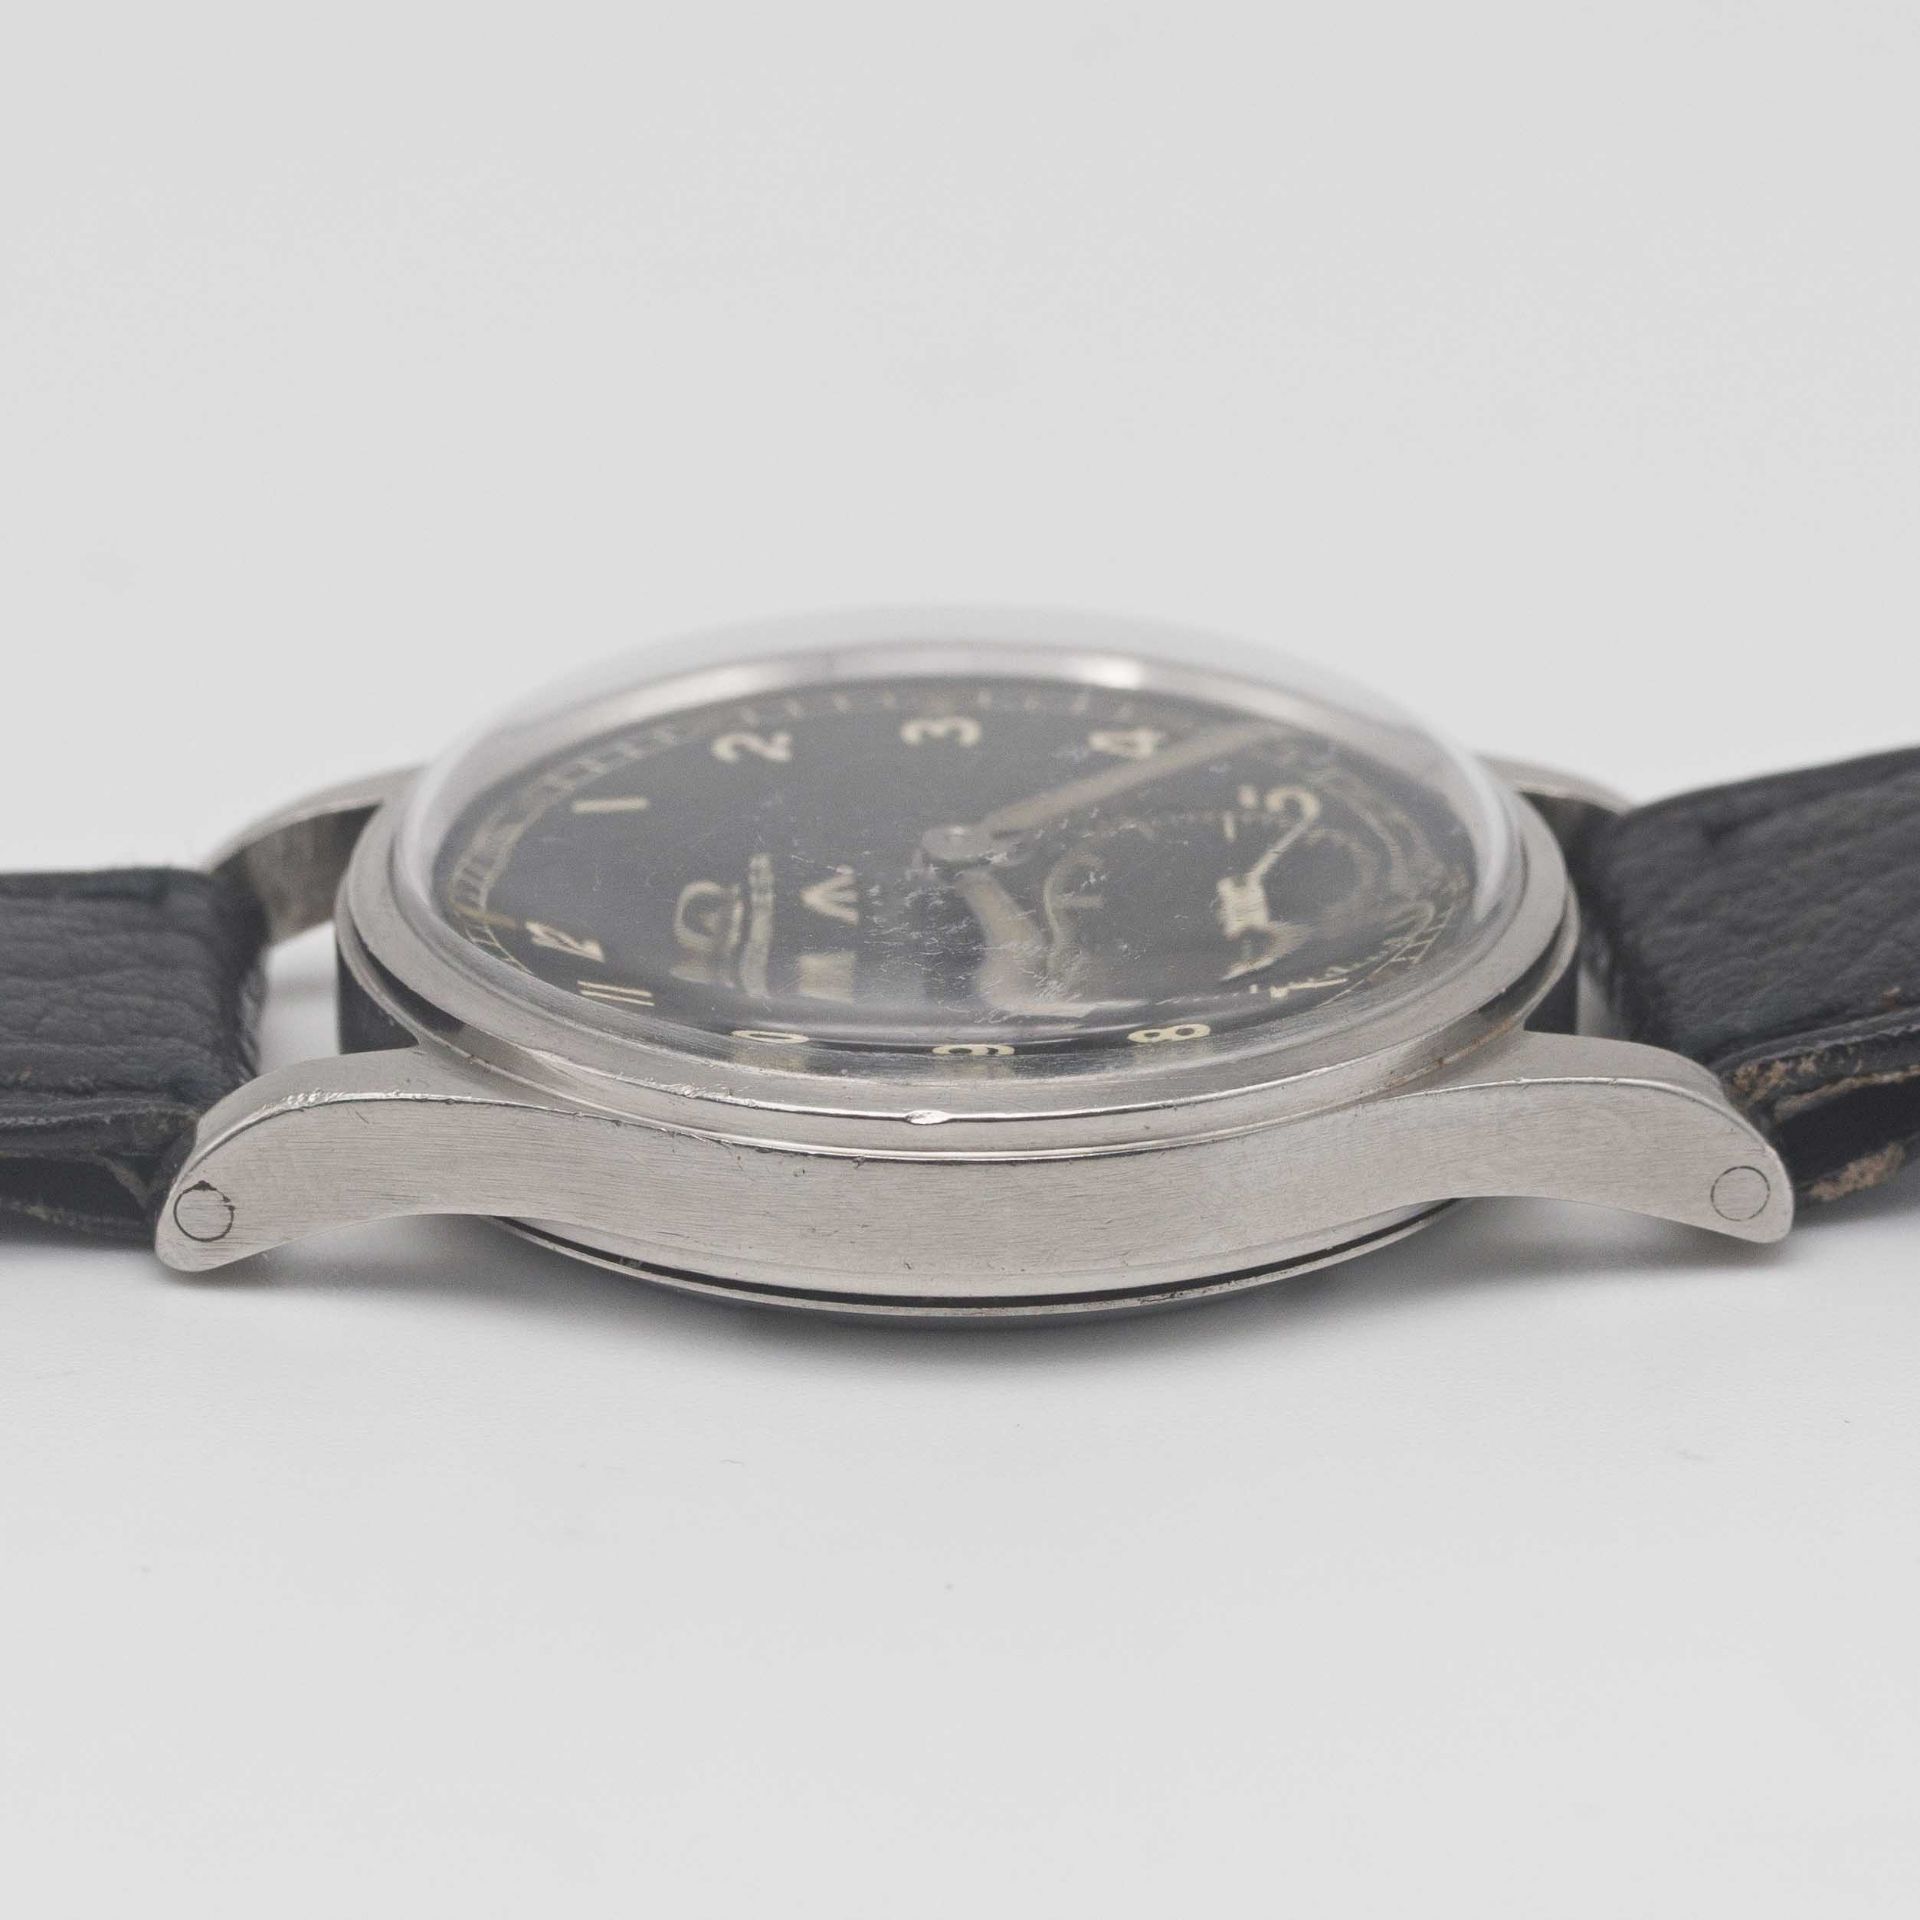 A GENTLEMAN'S STAINLESS STEEL BRITISH MILITARY OMEGA W.W.W. WRIST WATCH CIRCA 1945, PART OF THE " - Image 9 of 9